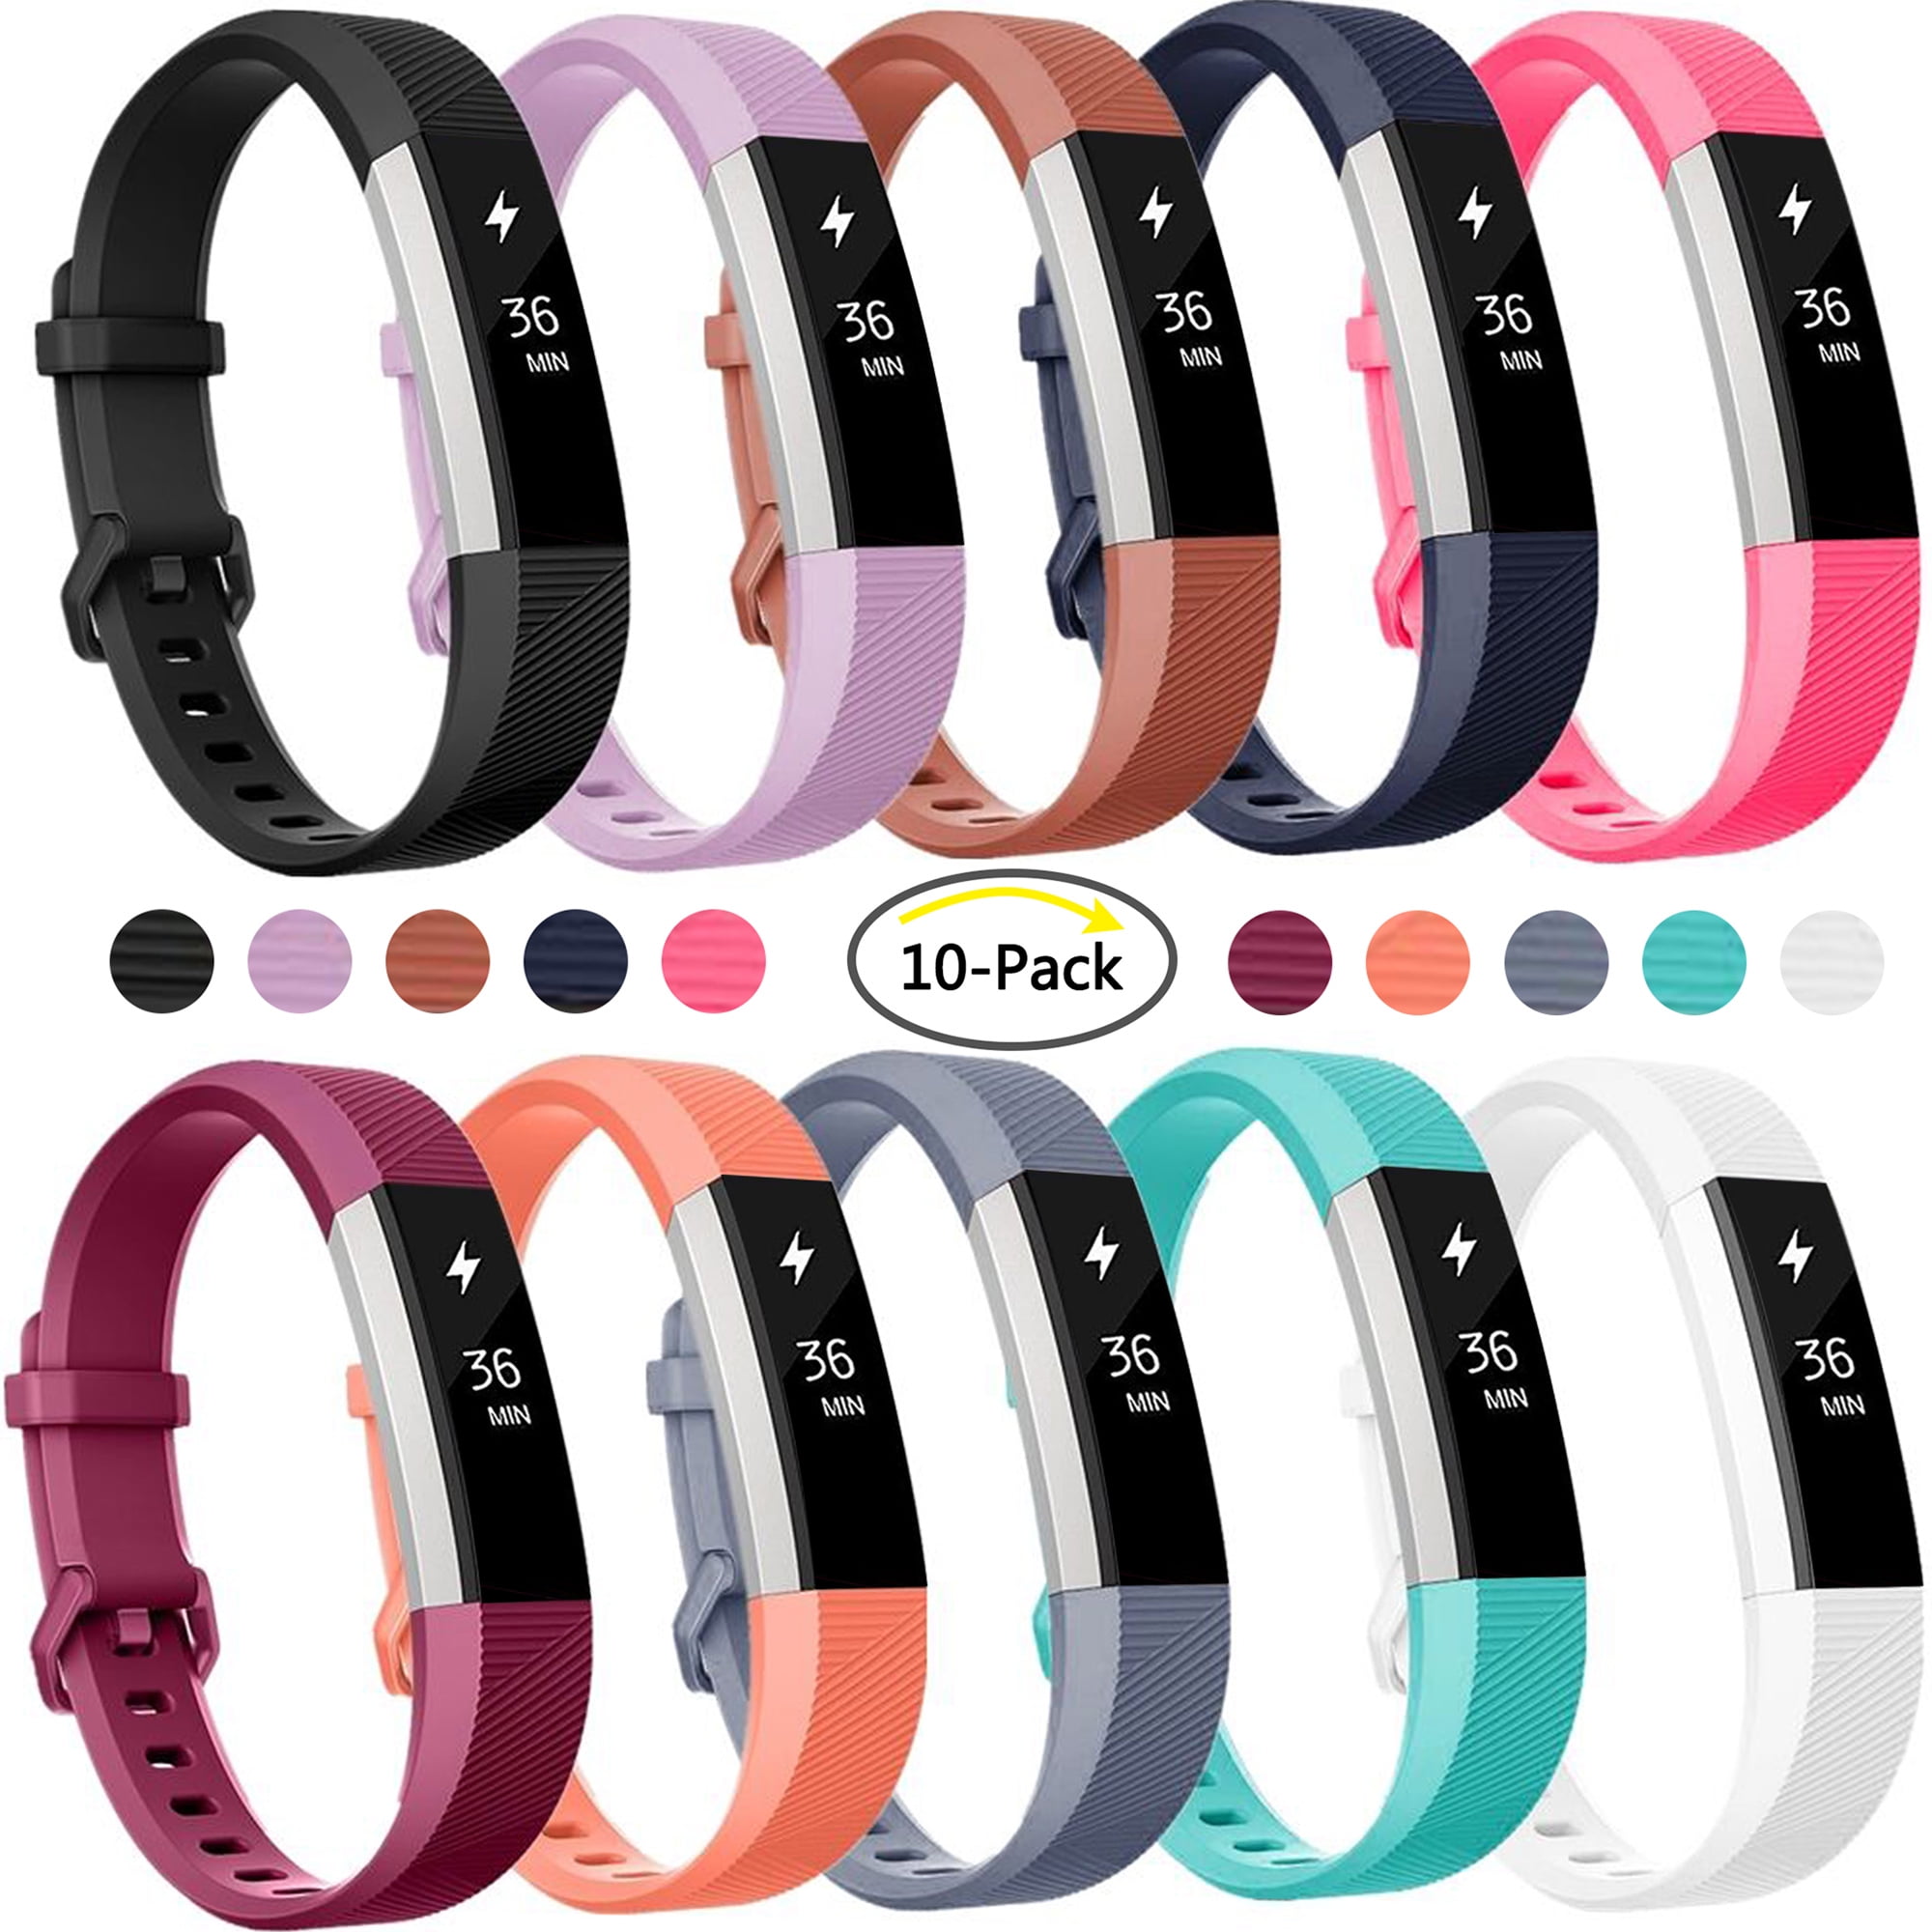 3x Replacement Silicone Wrist Band Strap Bracelet For Fitbit Alta/Fitbit Alta HR 